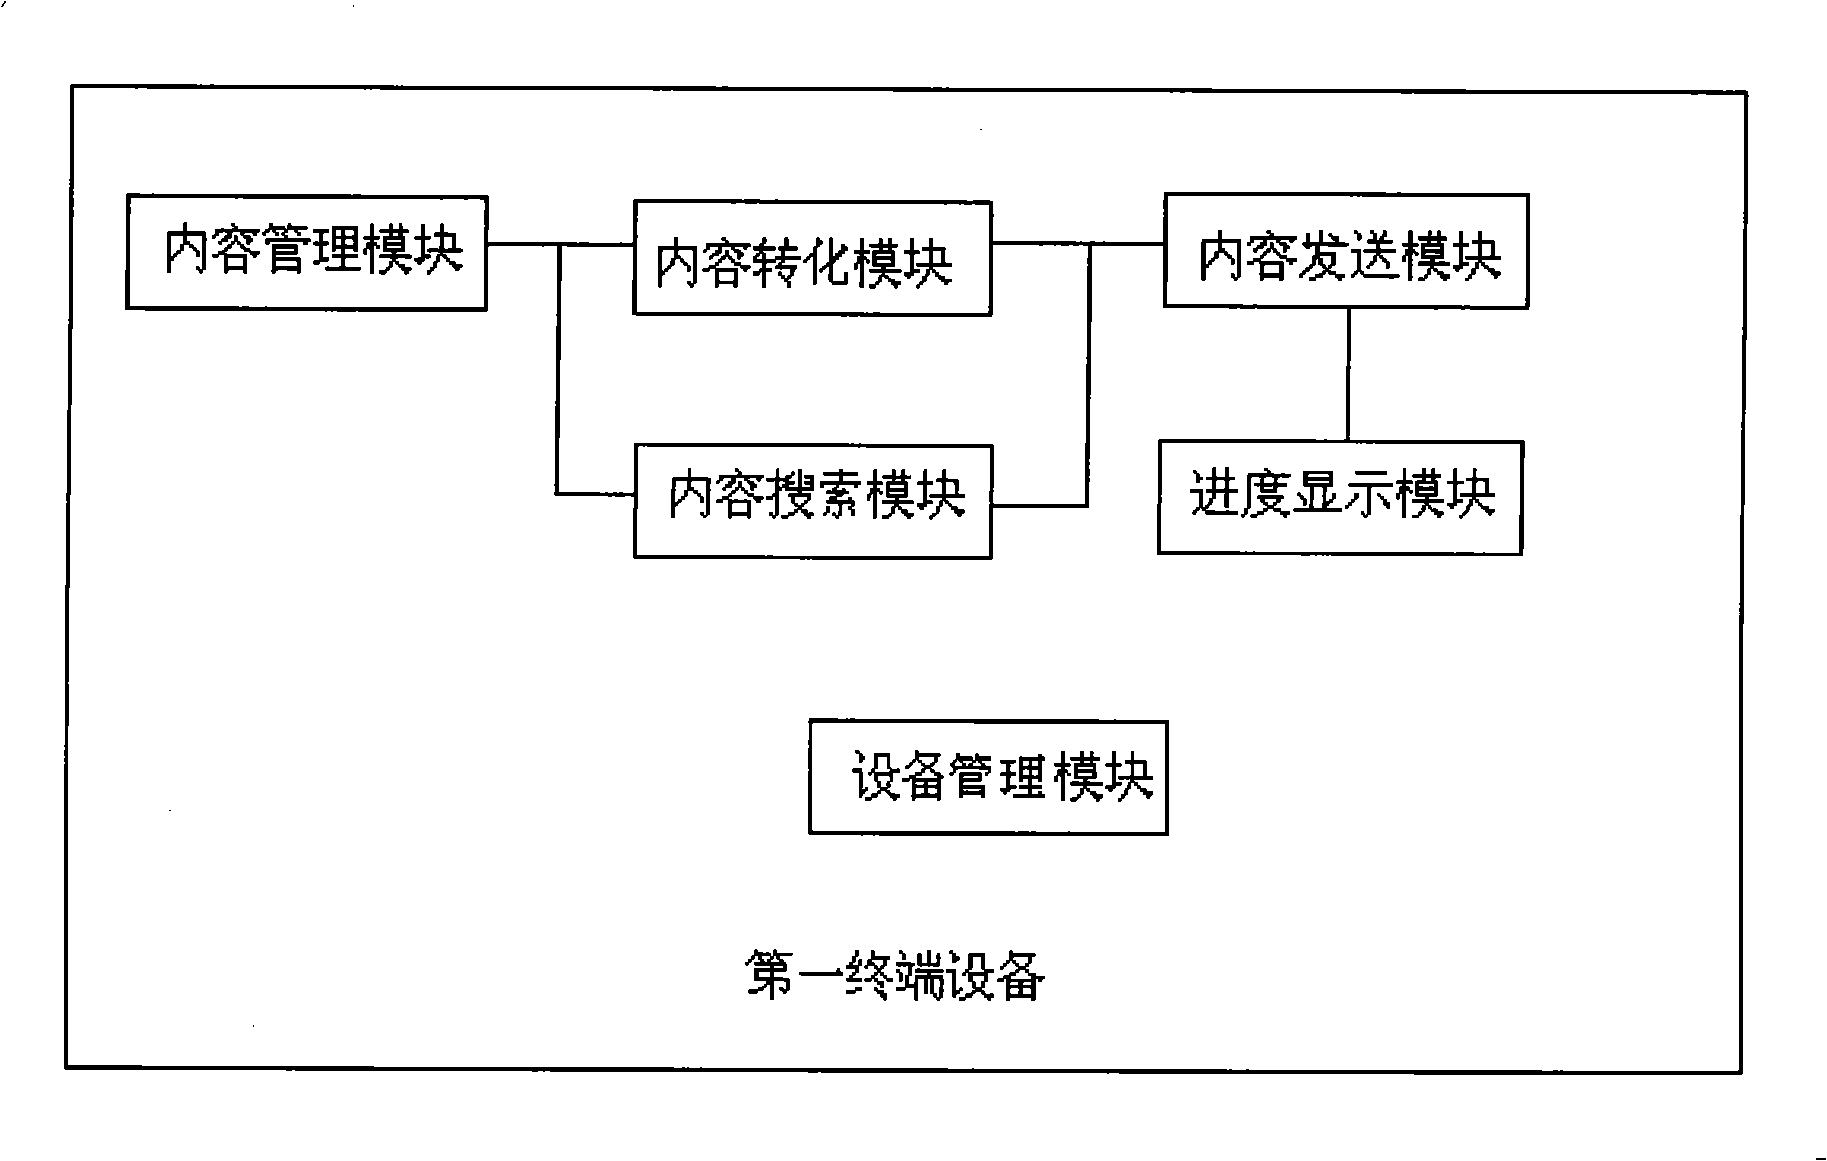 Network content sharing system and method